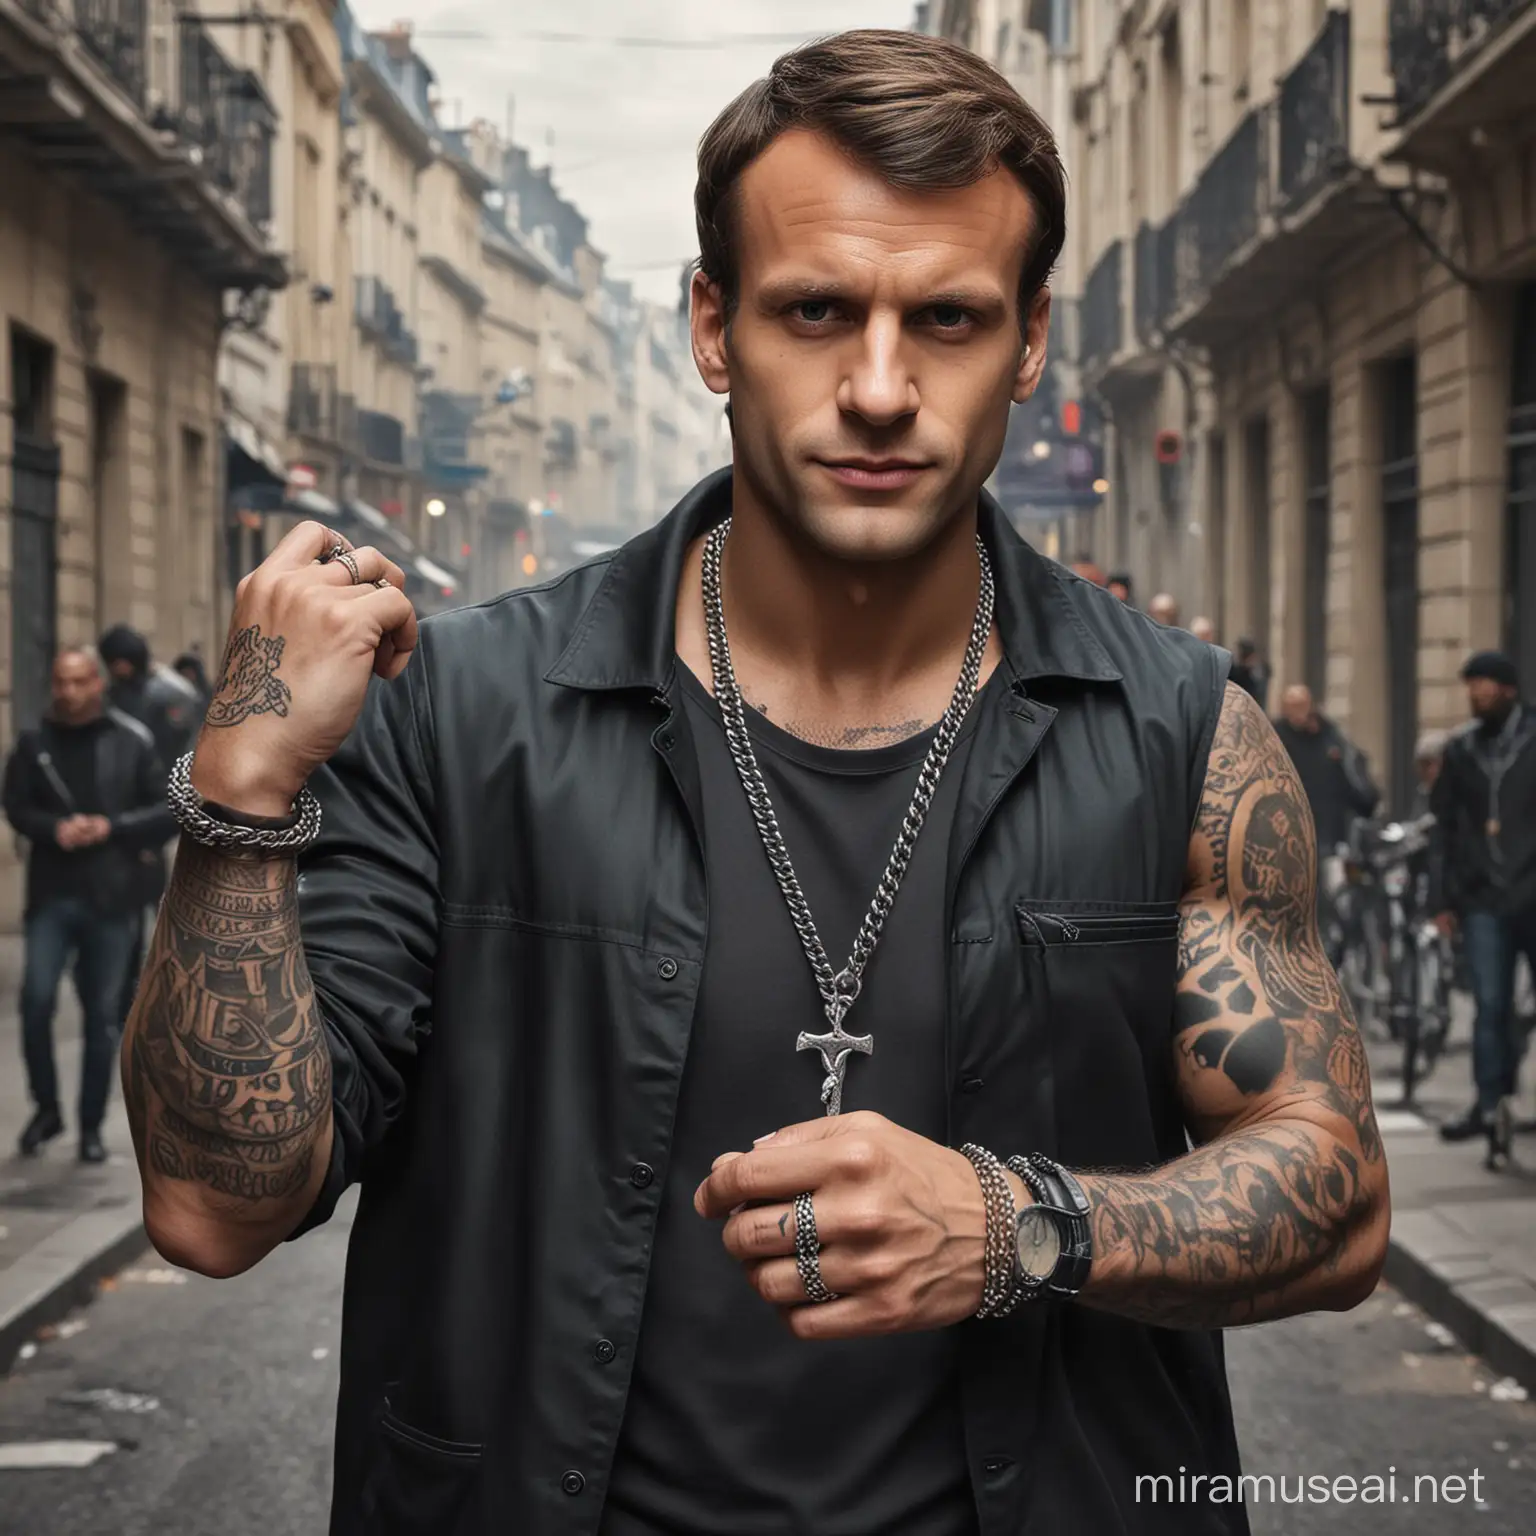 Emmanuel Macron Portrayed as a Street Gang Member with Tattoos and Chains